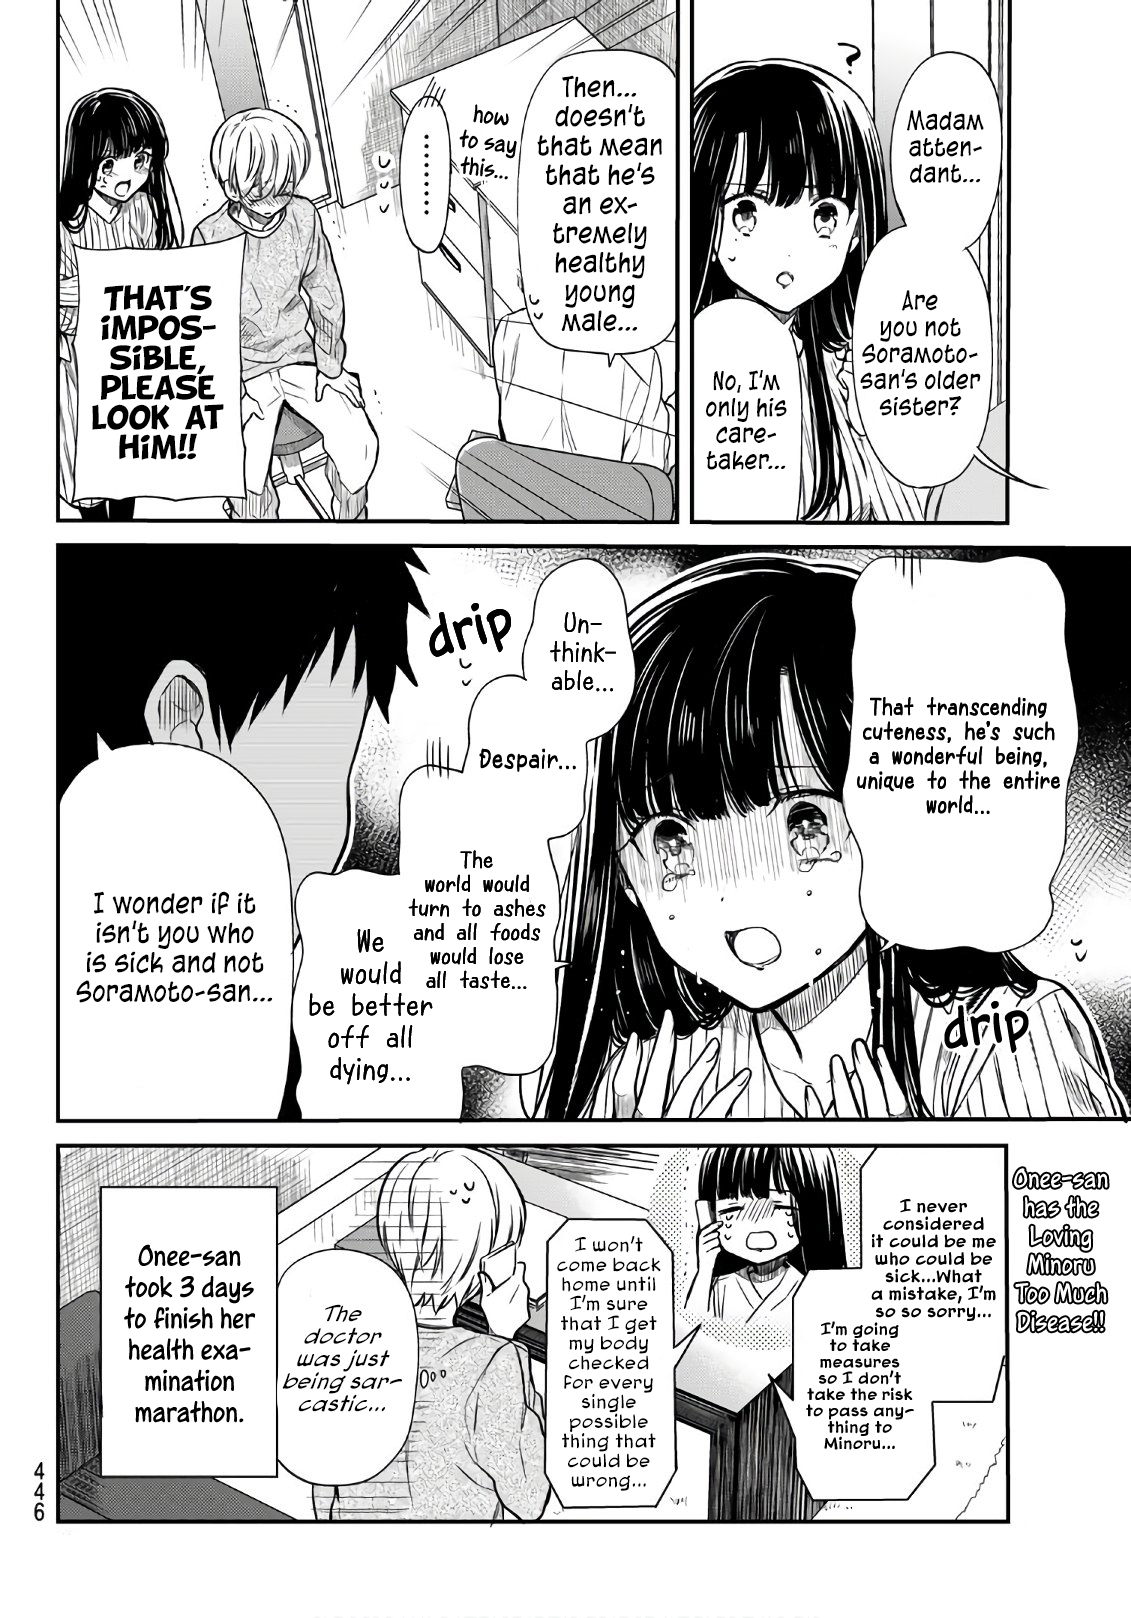 The Story Of An Onee-San Who Wants To Keep A High School Boy Vol.5 Chapter 112